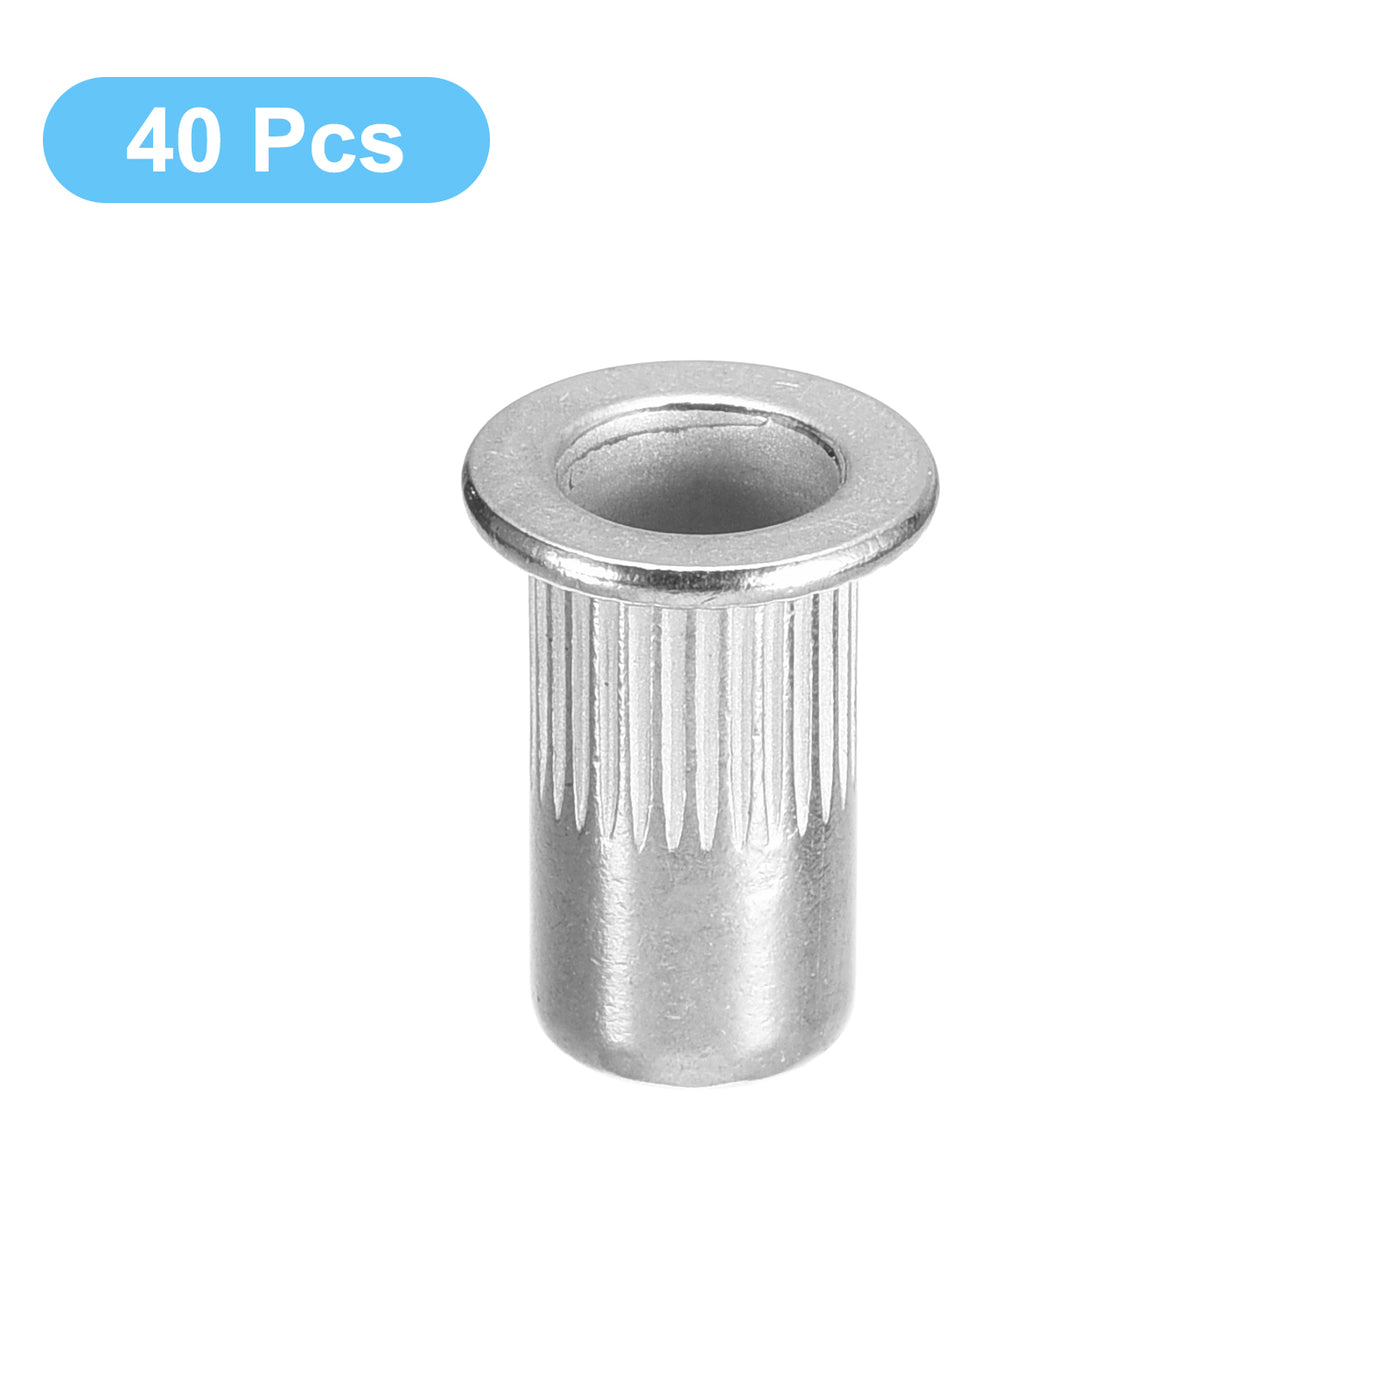 uxcell Uxcell Rivet Nuts, 304 Stainless Steel Knurled Flat Head Threaded Insert Nuts for Metal, Plastic